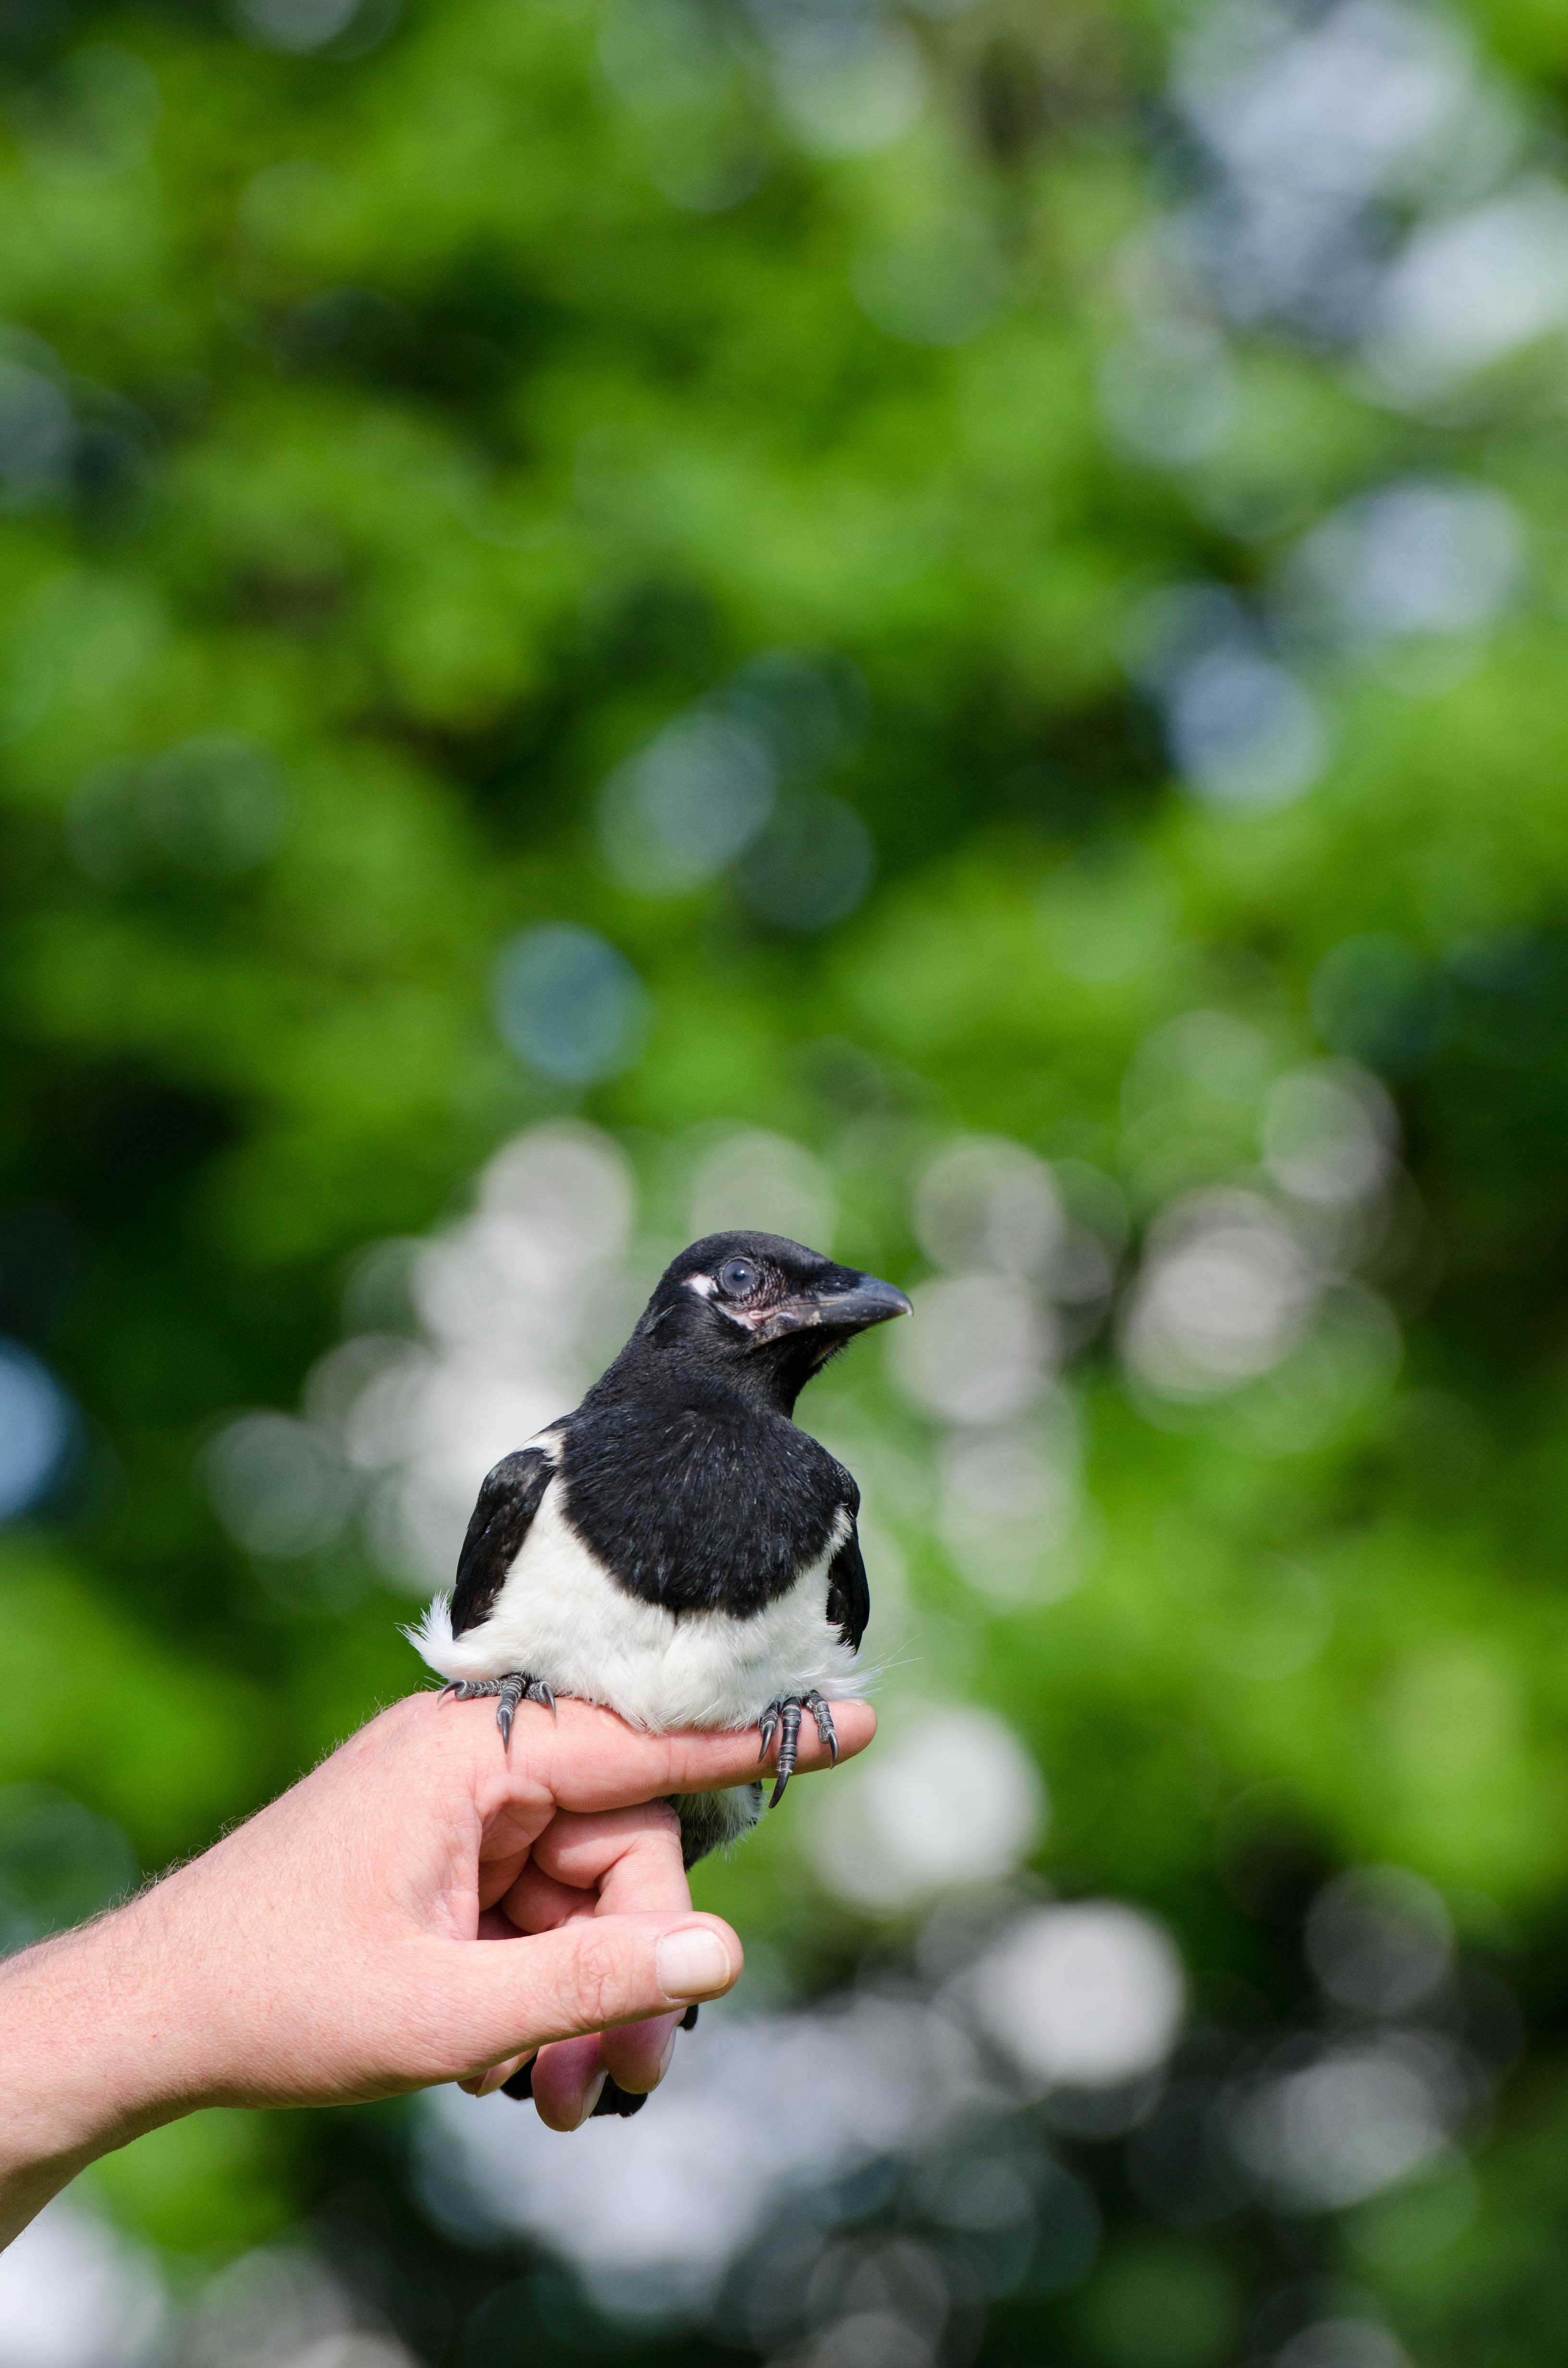 white and black bird on human hand outdoor